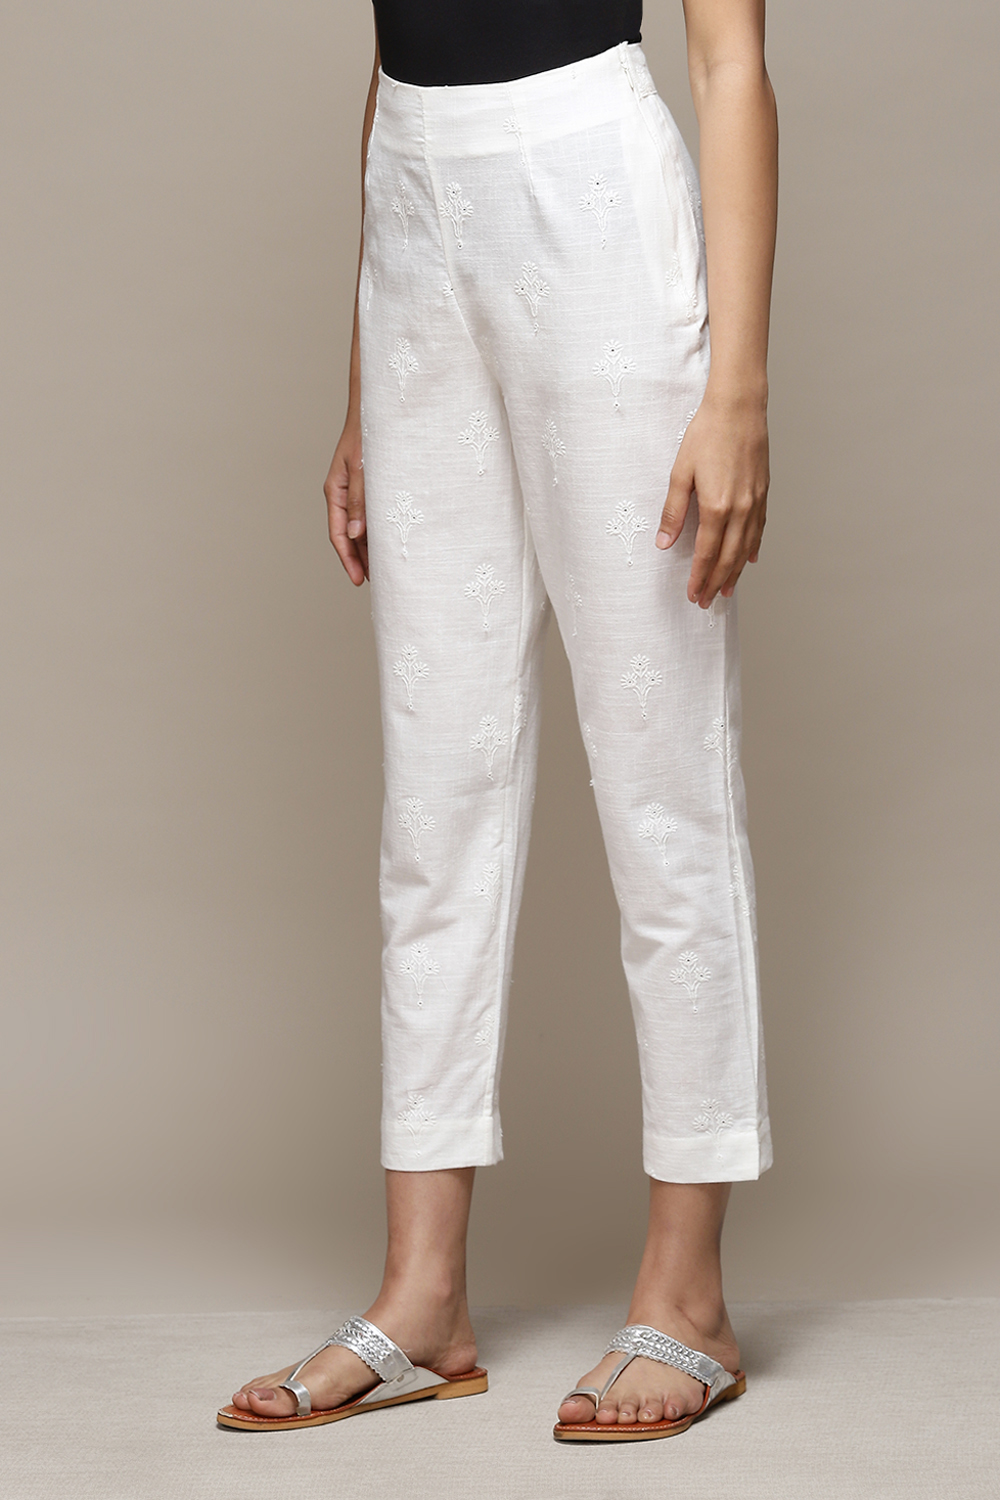 Buy White Handcrafted Narrow Cotton Pants